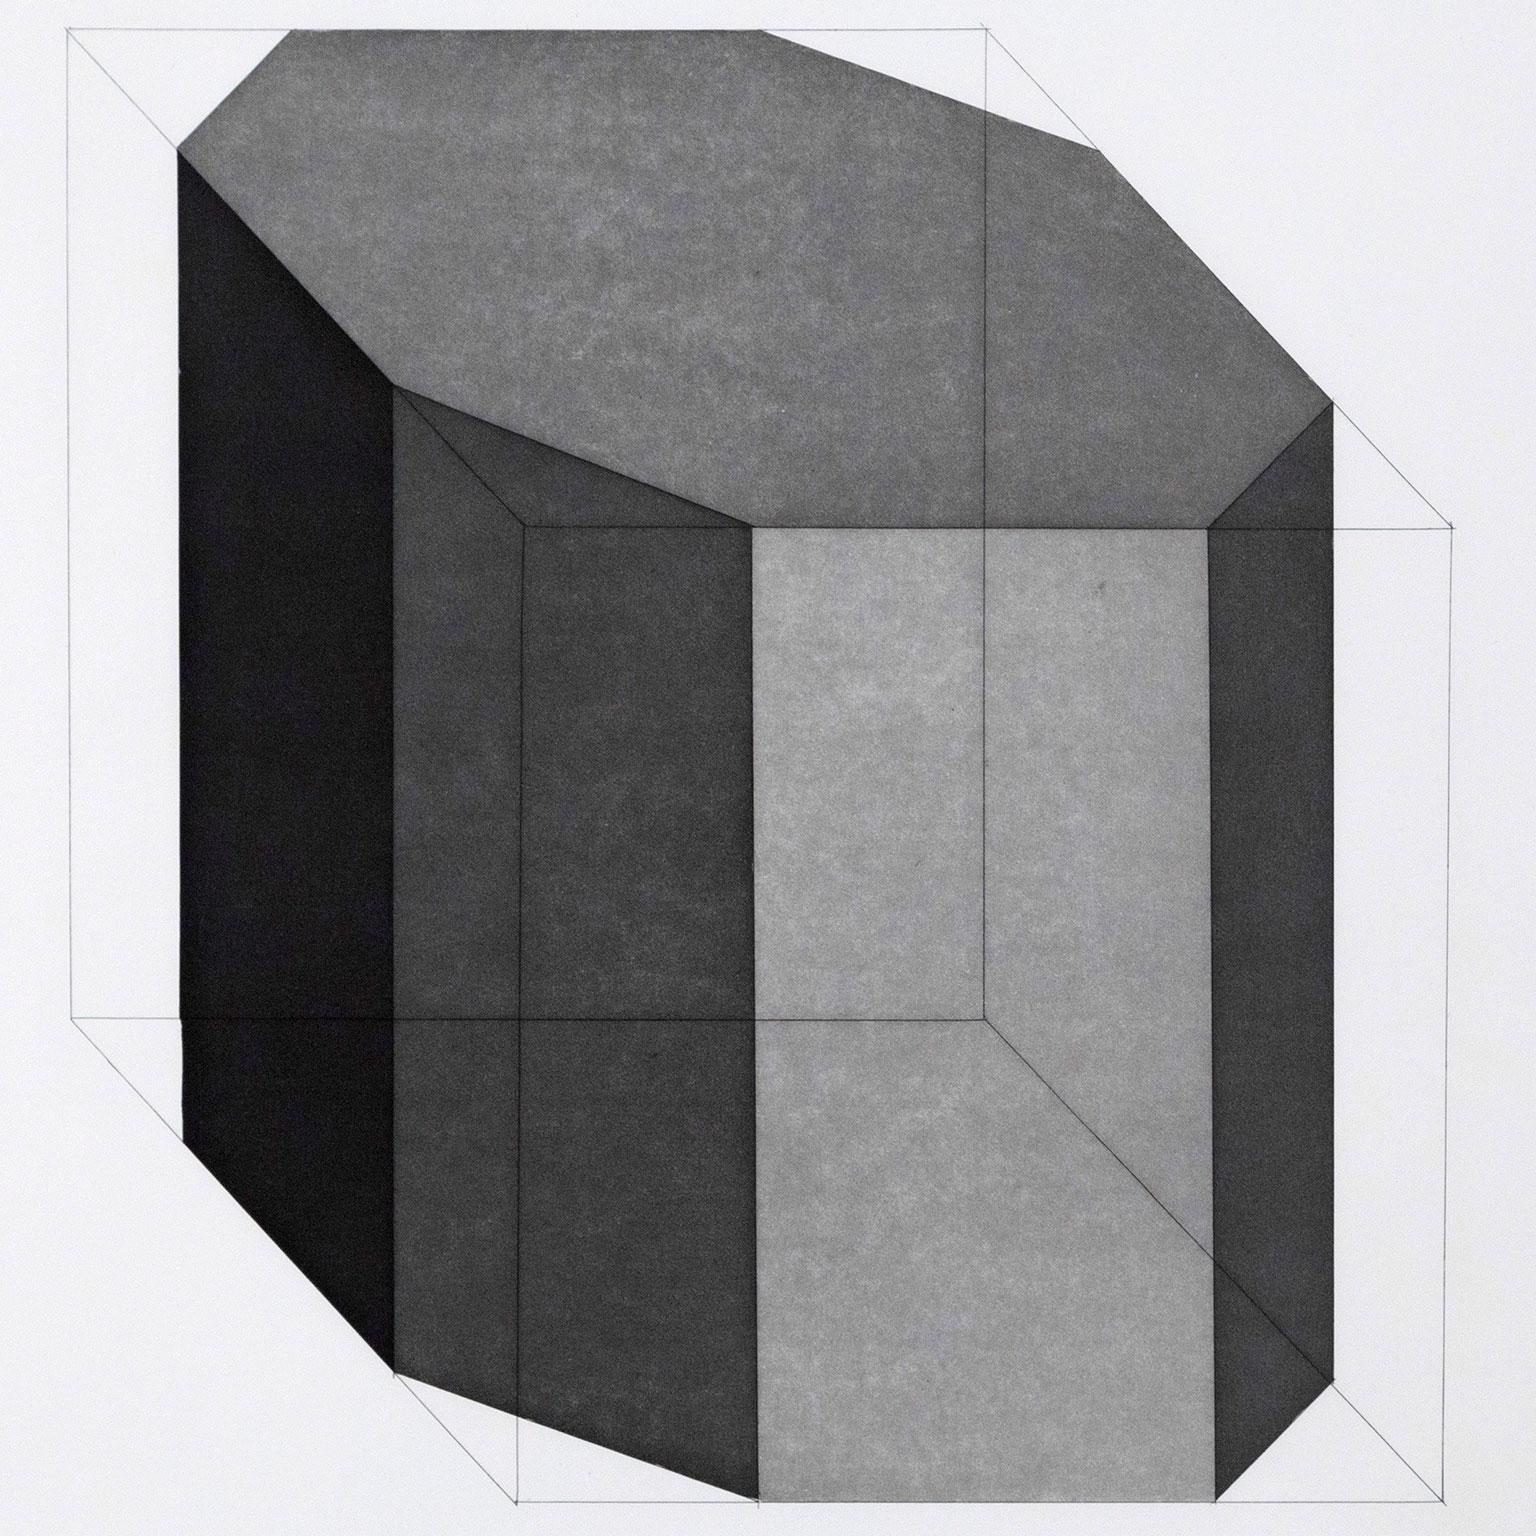 Forms Derived from a Cube 12 - Minimalist Print by Sol LeWitt